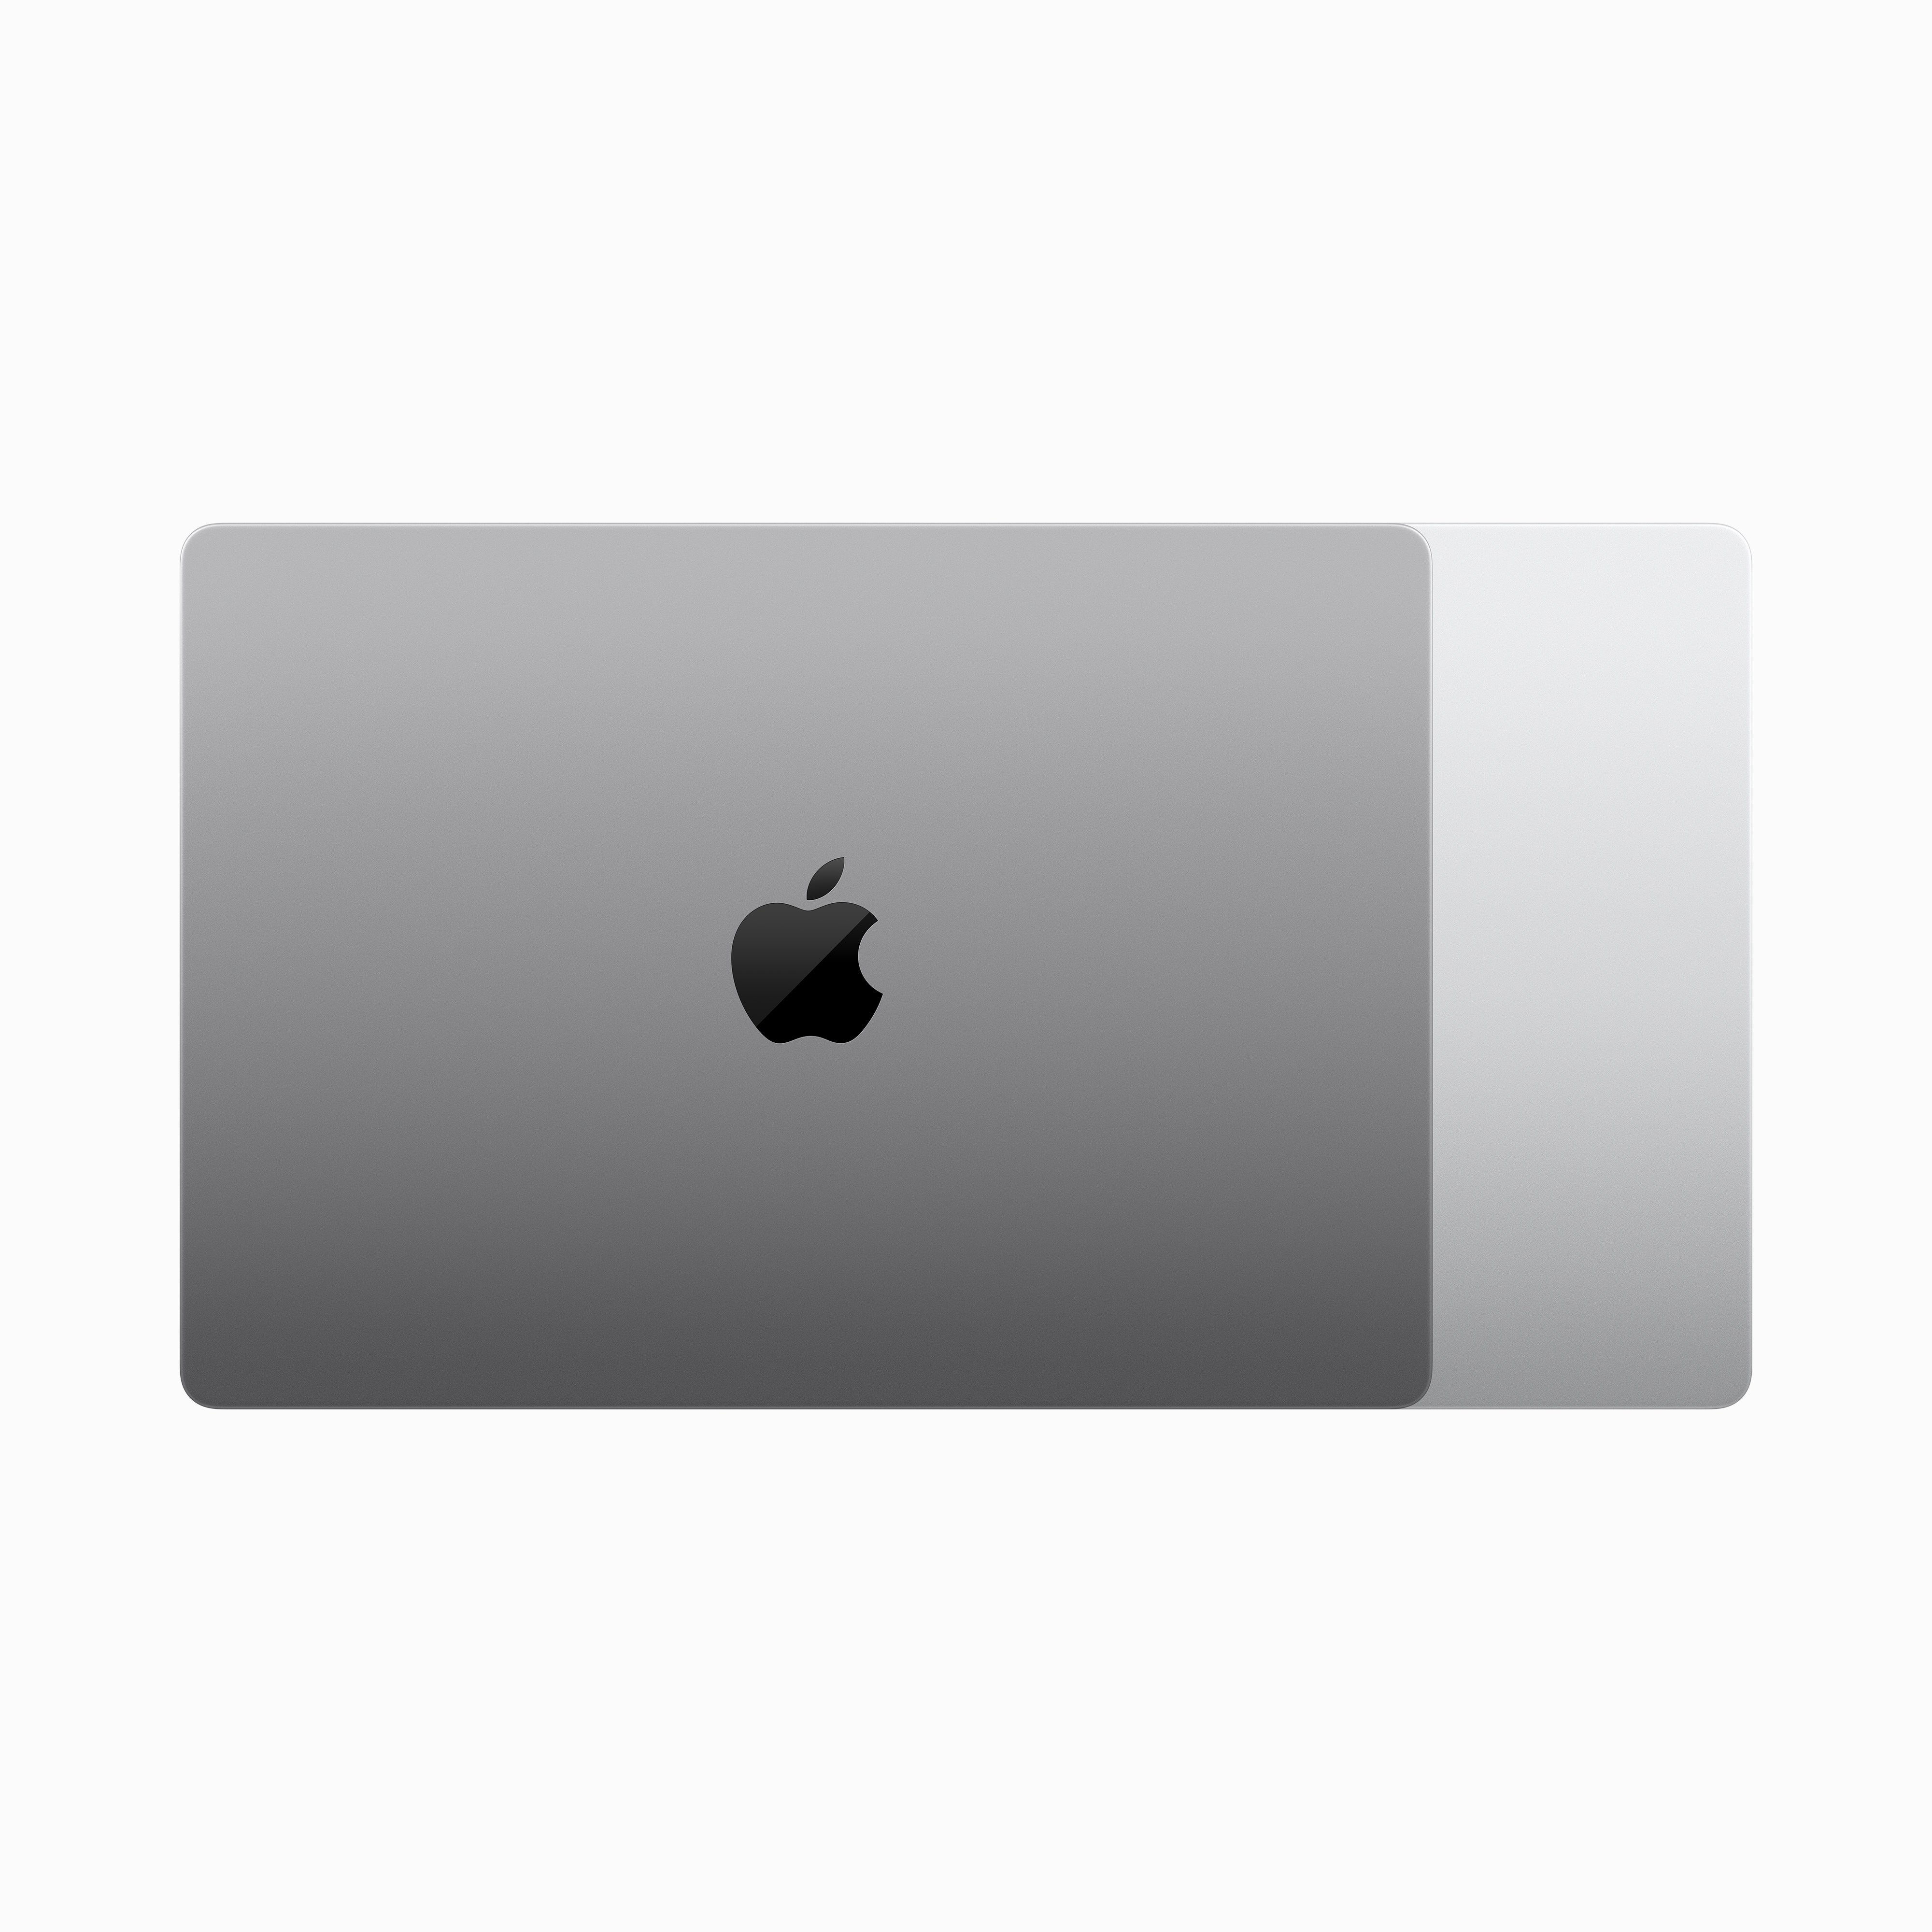 14-inch MacBook Pro: Apple M3 chip with 8C CPU and 10C GPU, 512GB SSD - Space Grey